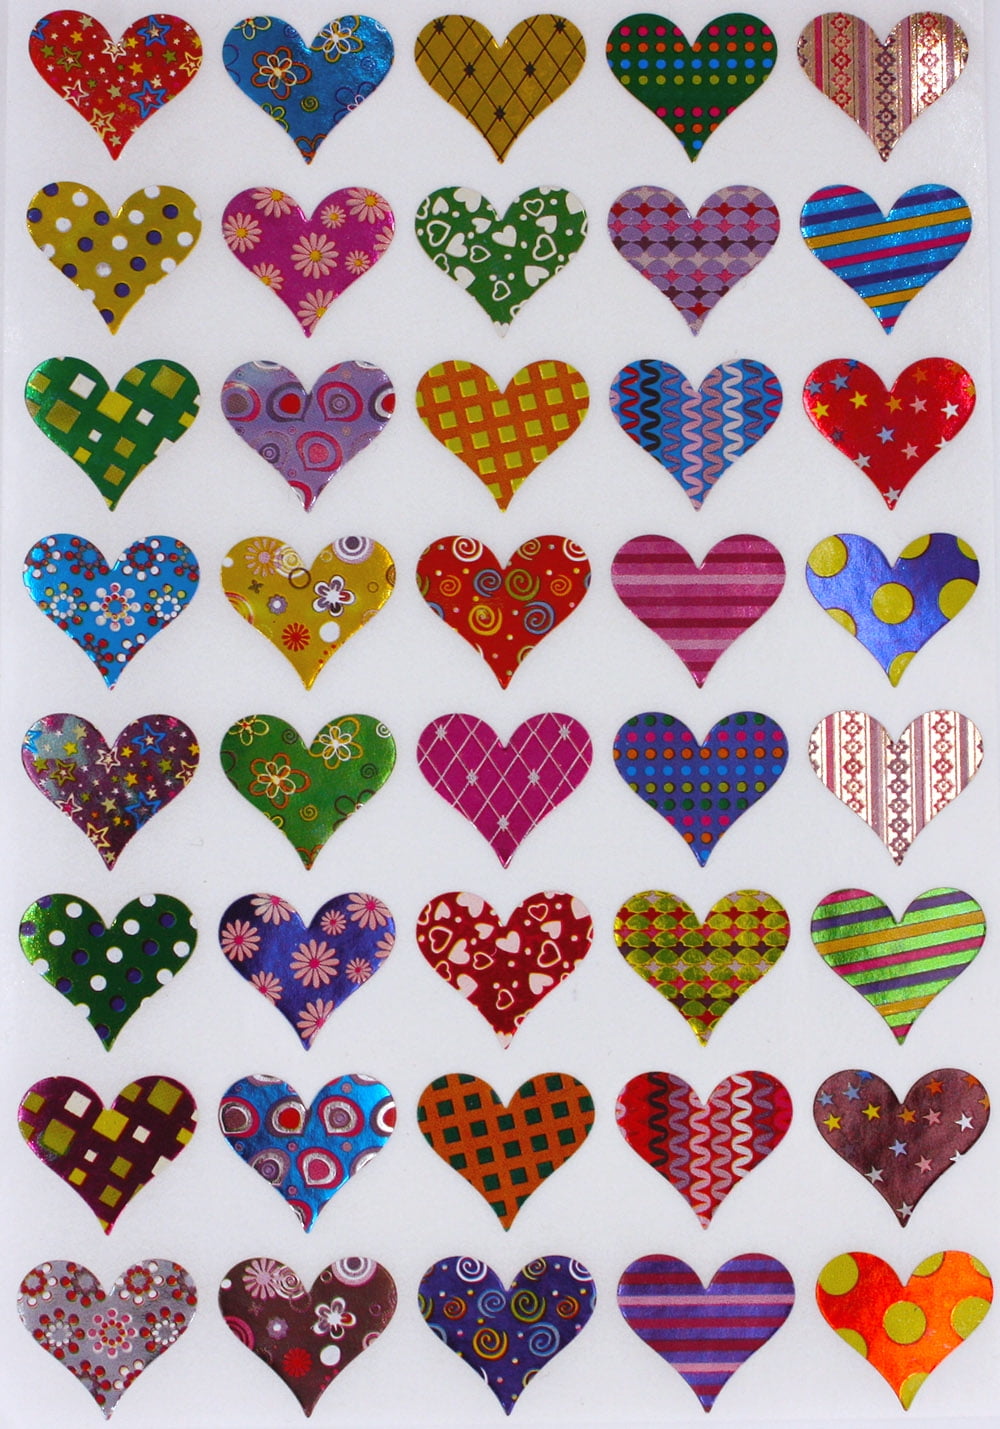 Heart Shaped Rhinestone Stickers, Assorted Sizes, 54-Count - Pink